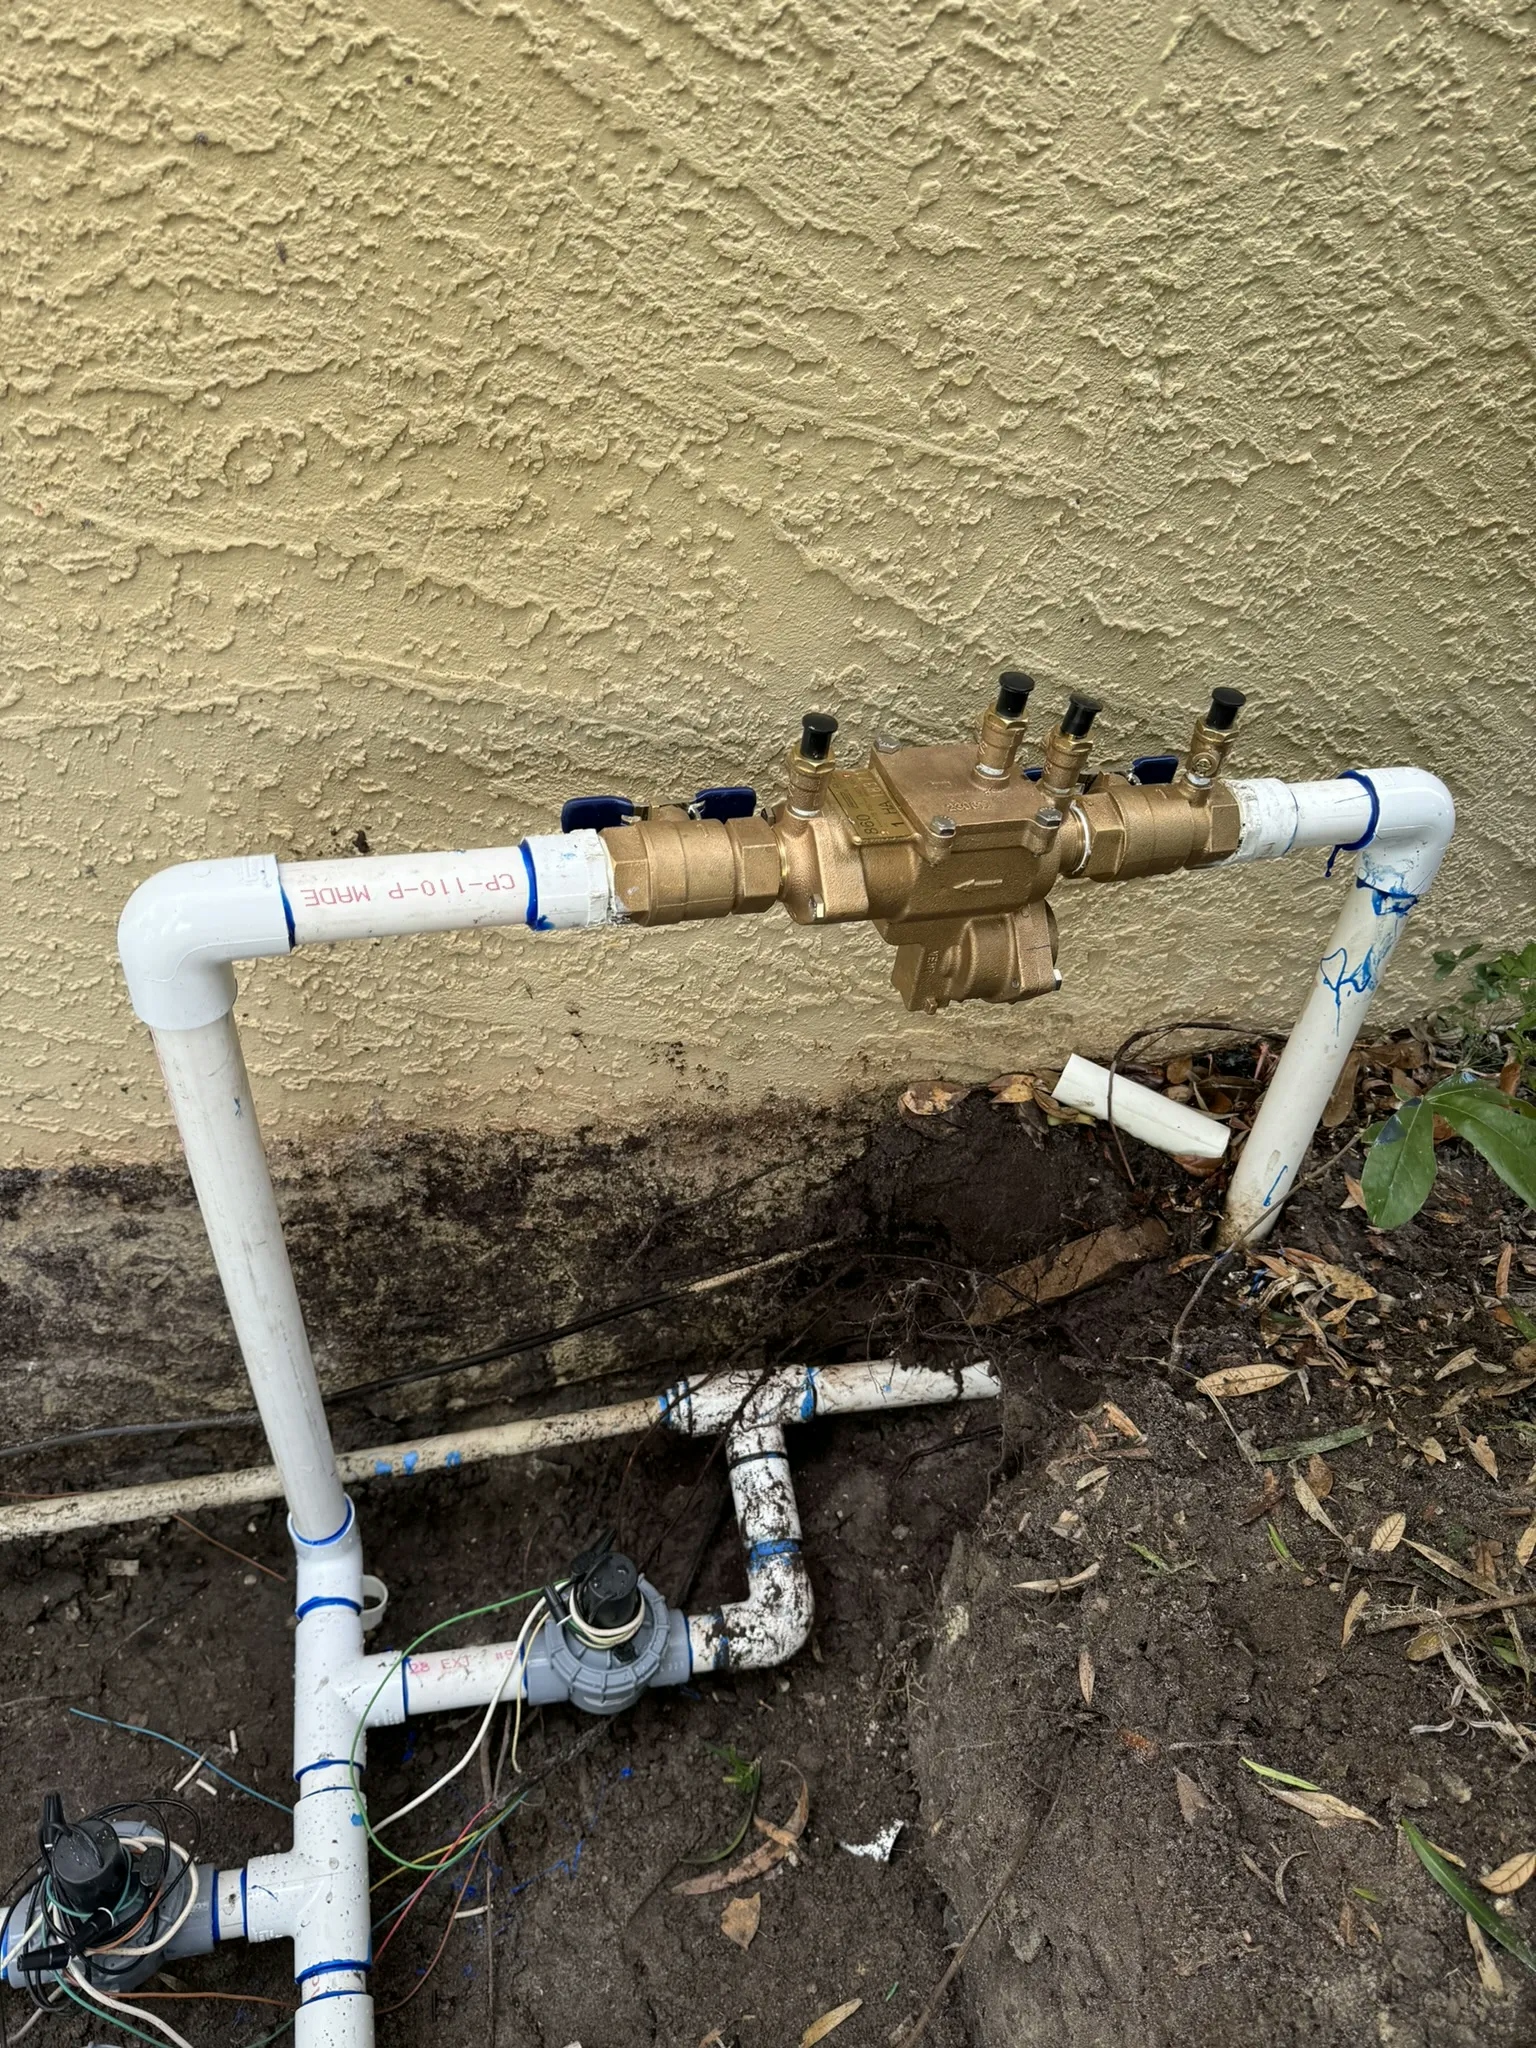 A residential sprinkler system PVC pipes and valves, installed underground near the home's foundation.